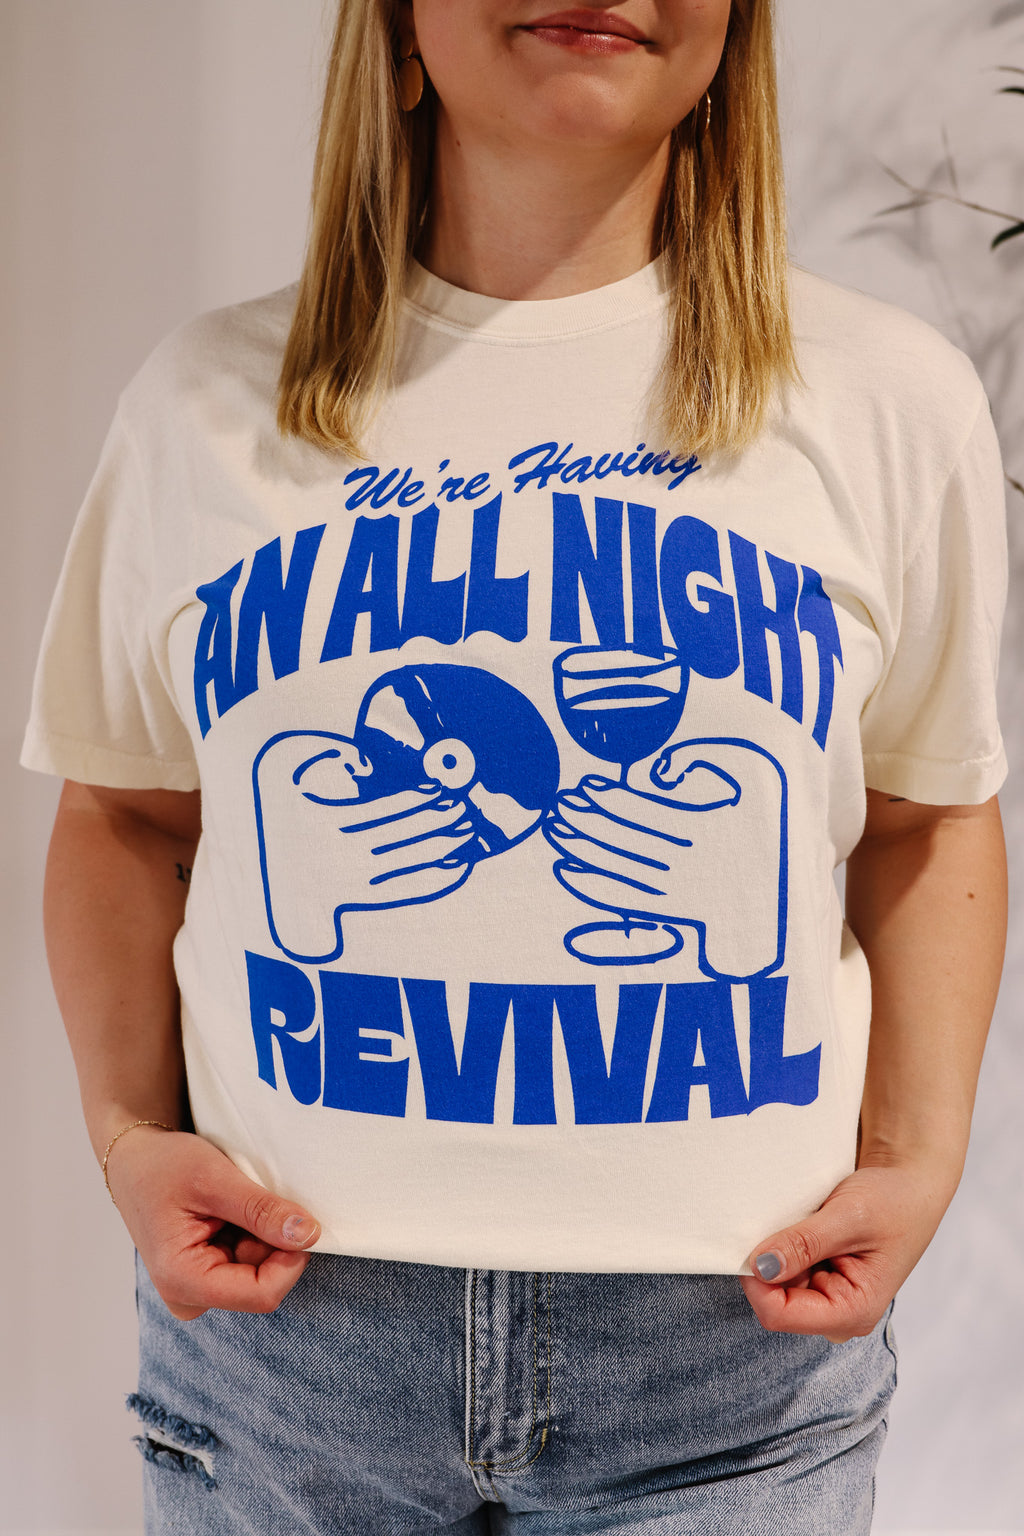 All Night Revival Graphic Tee